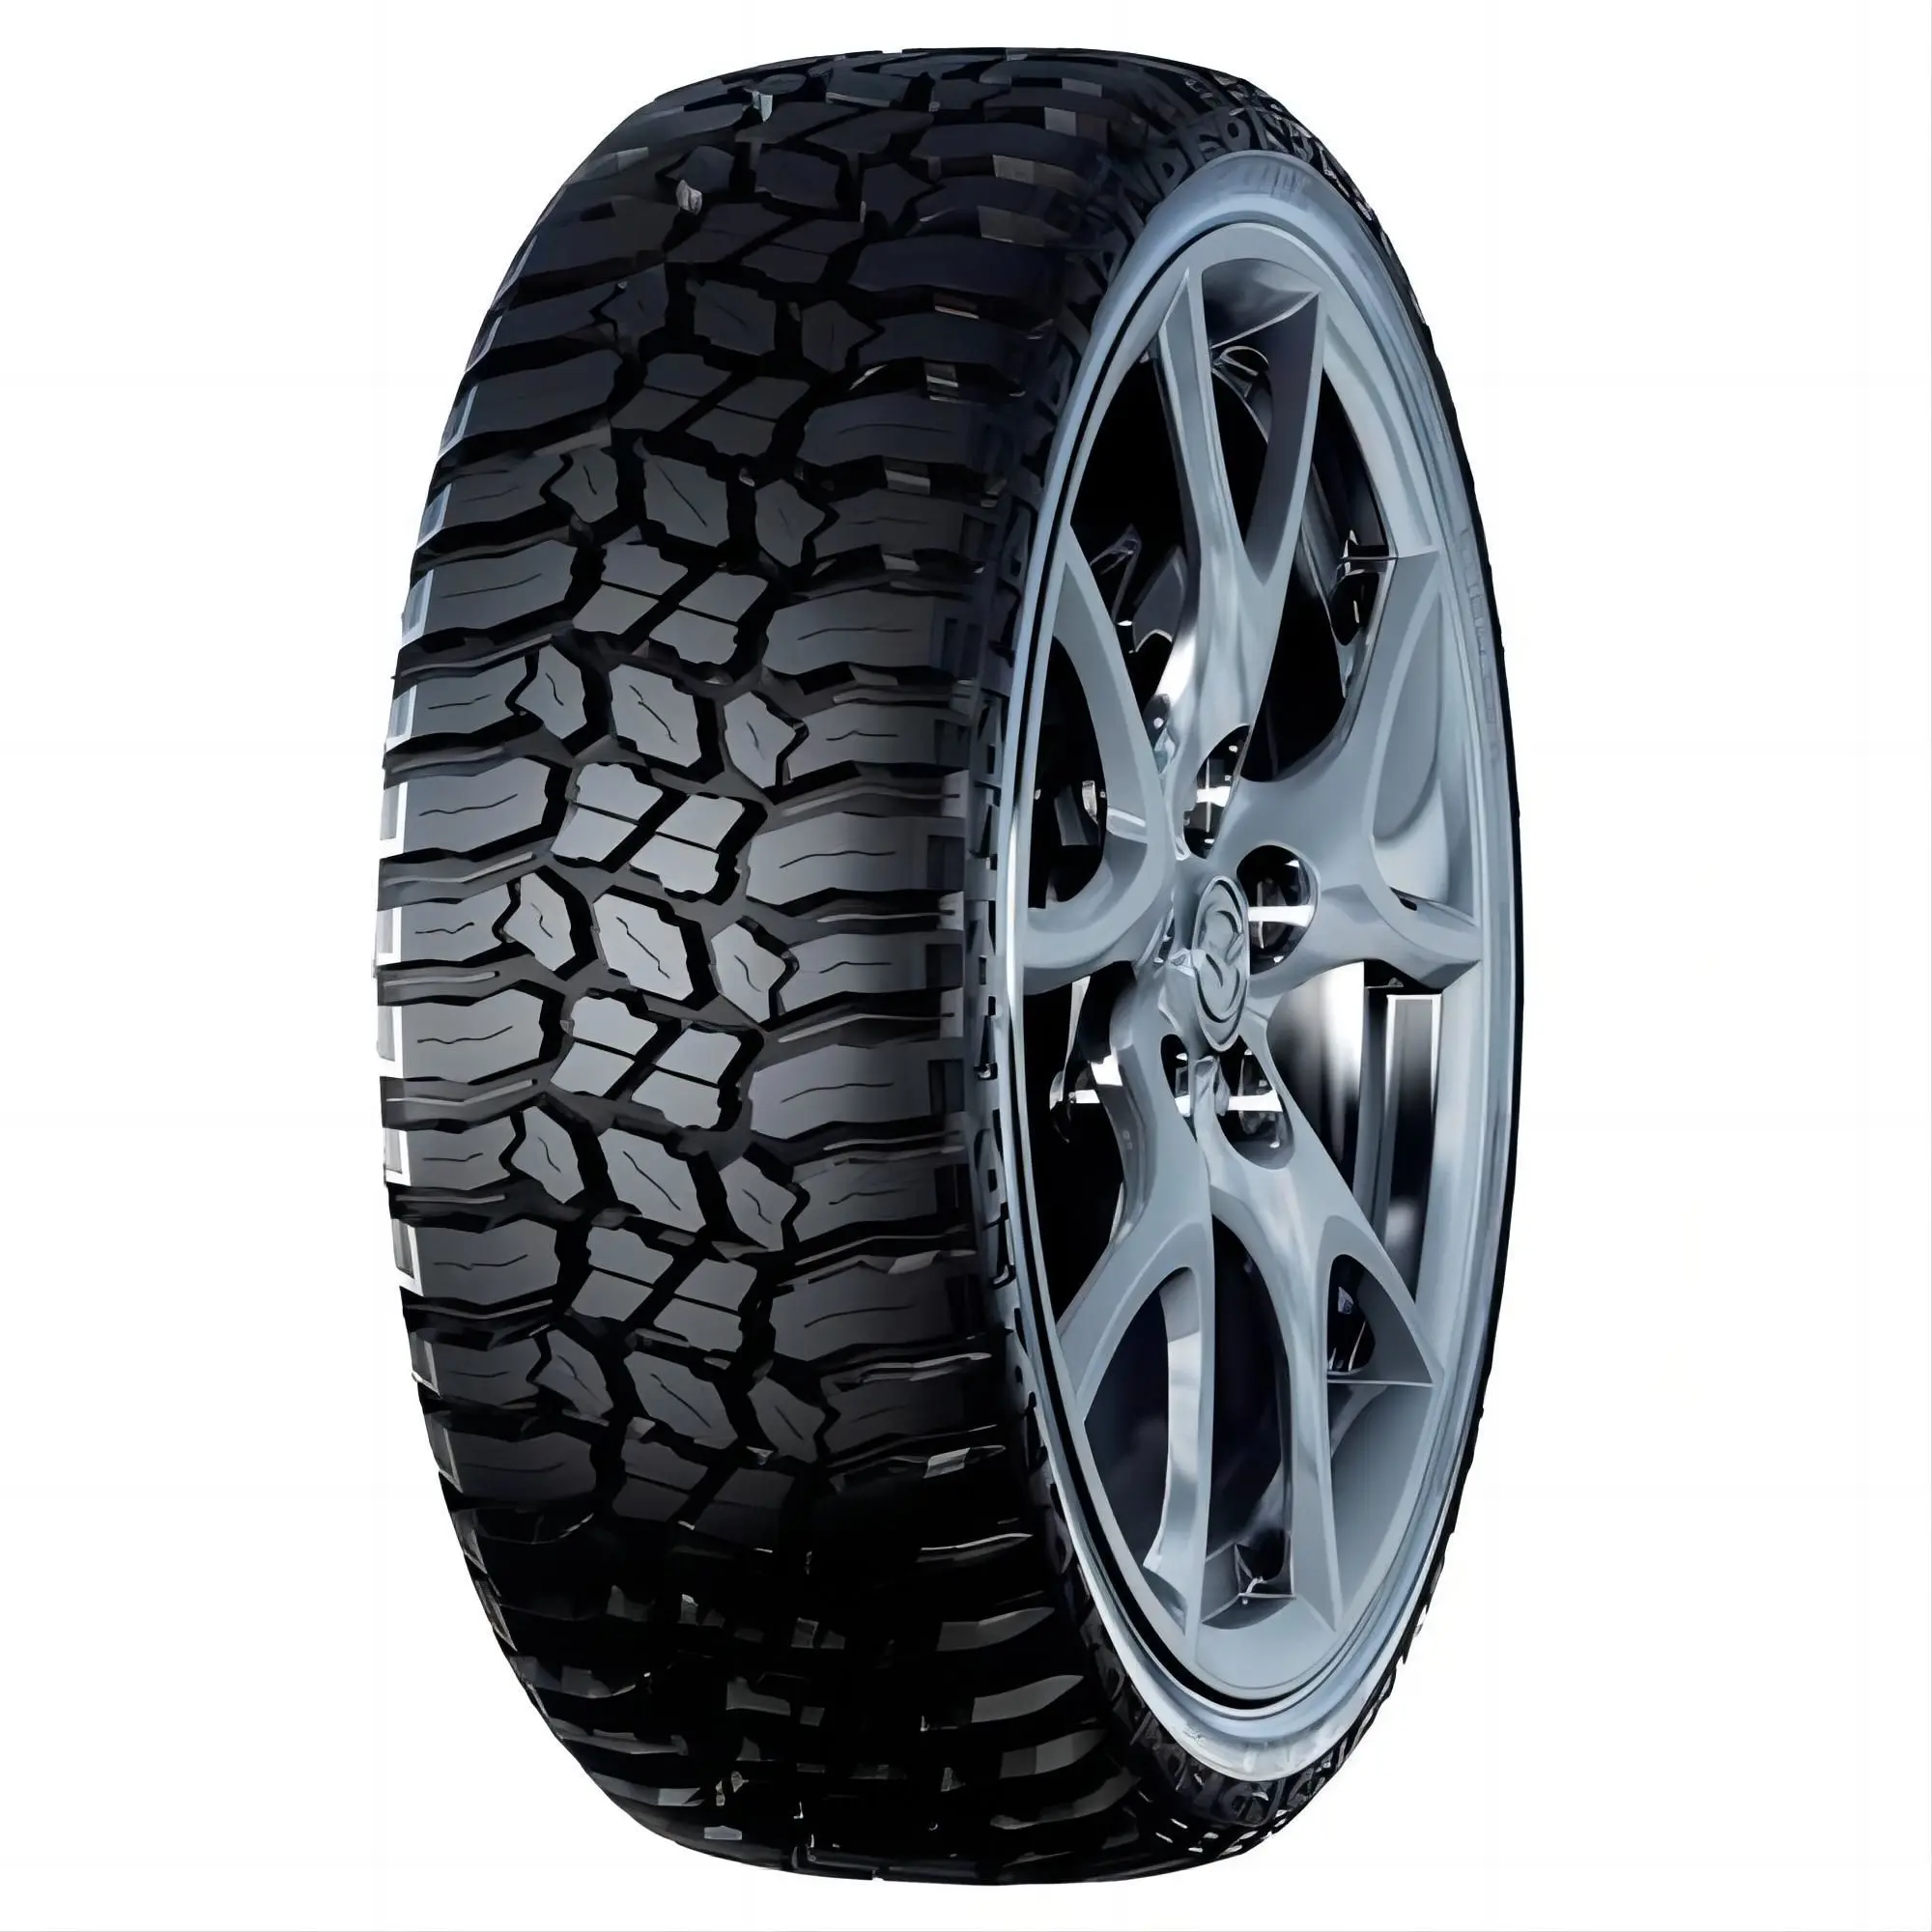 

Tubeless tires for cars 275 55 20 275 55 r 20 all terrain 275/55/r20 275/55/20 other wheels rims